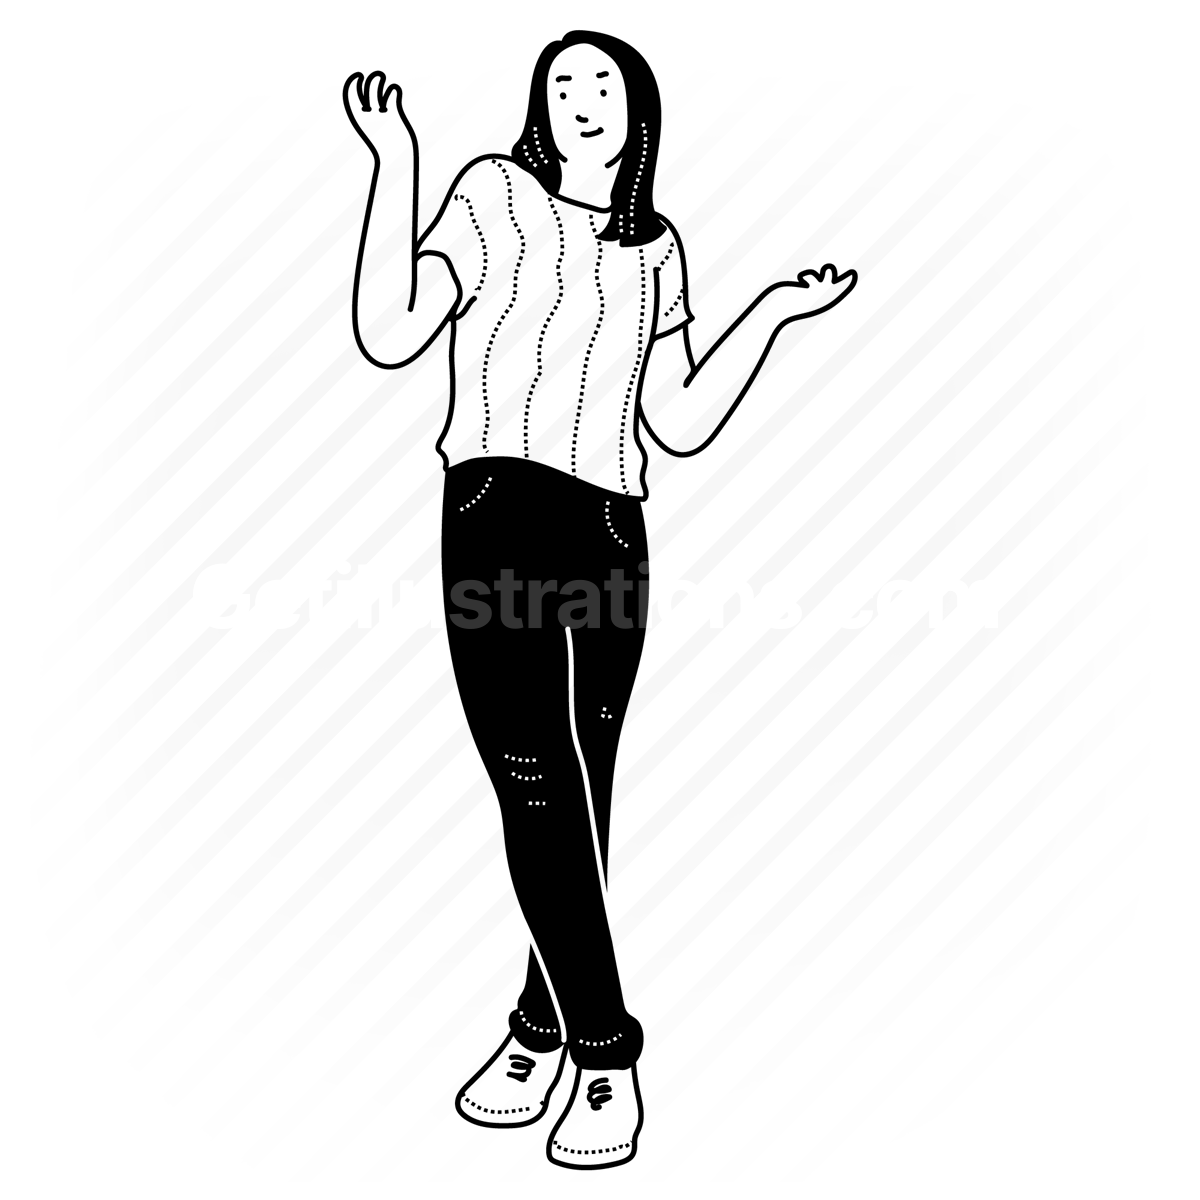 teenager, teenagers, people, person, girl, casual, tshirt, t-shirt, pose